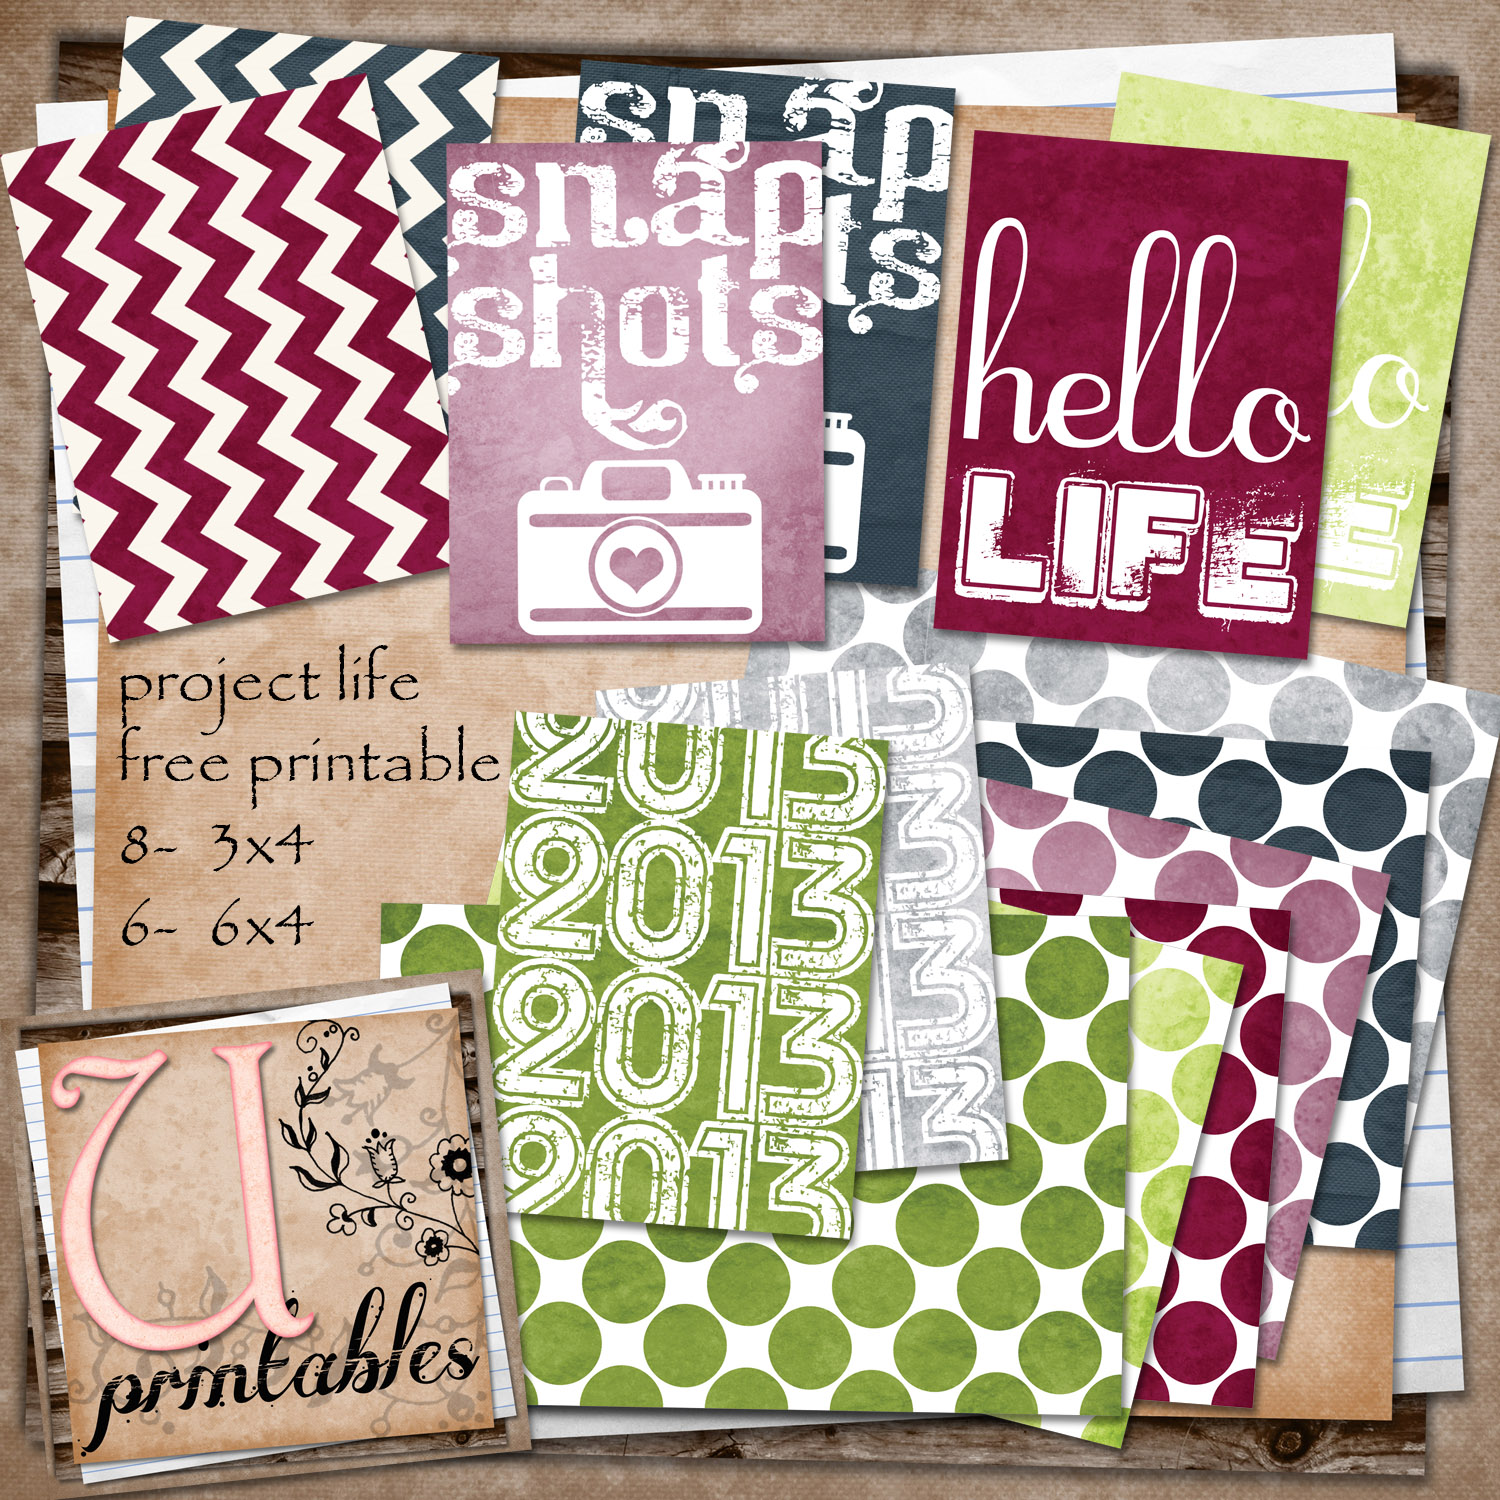 rebeccab-designs-free-printable-project-life-swamped